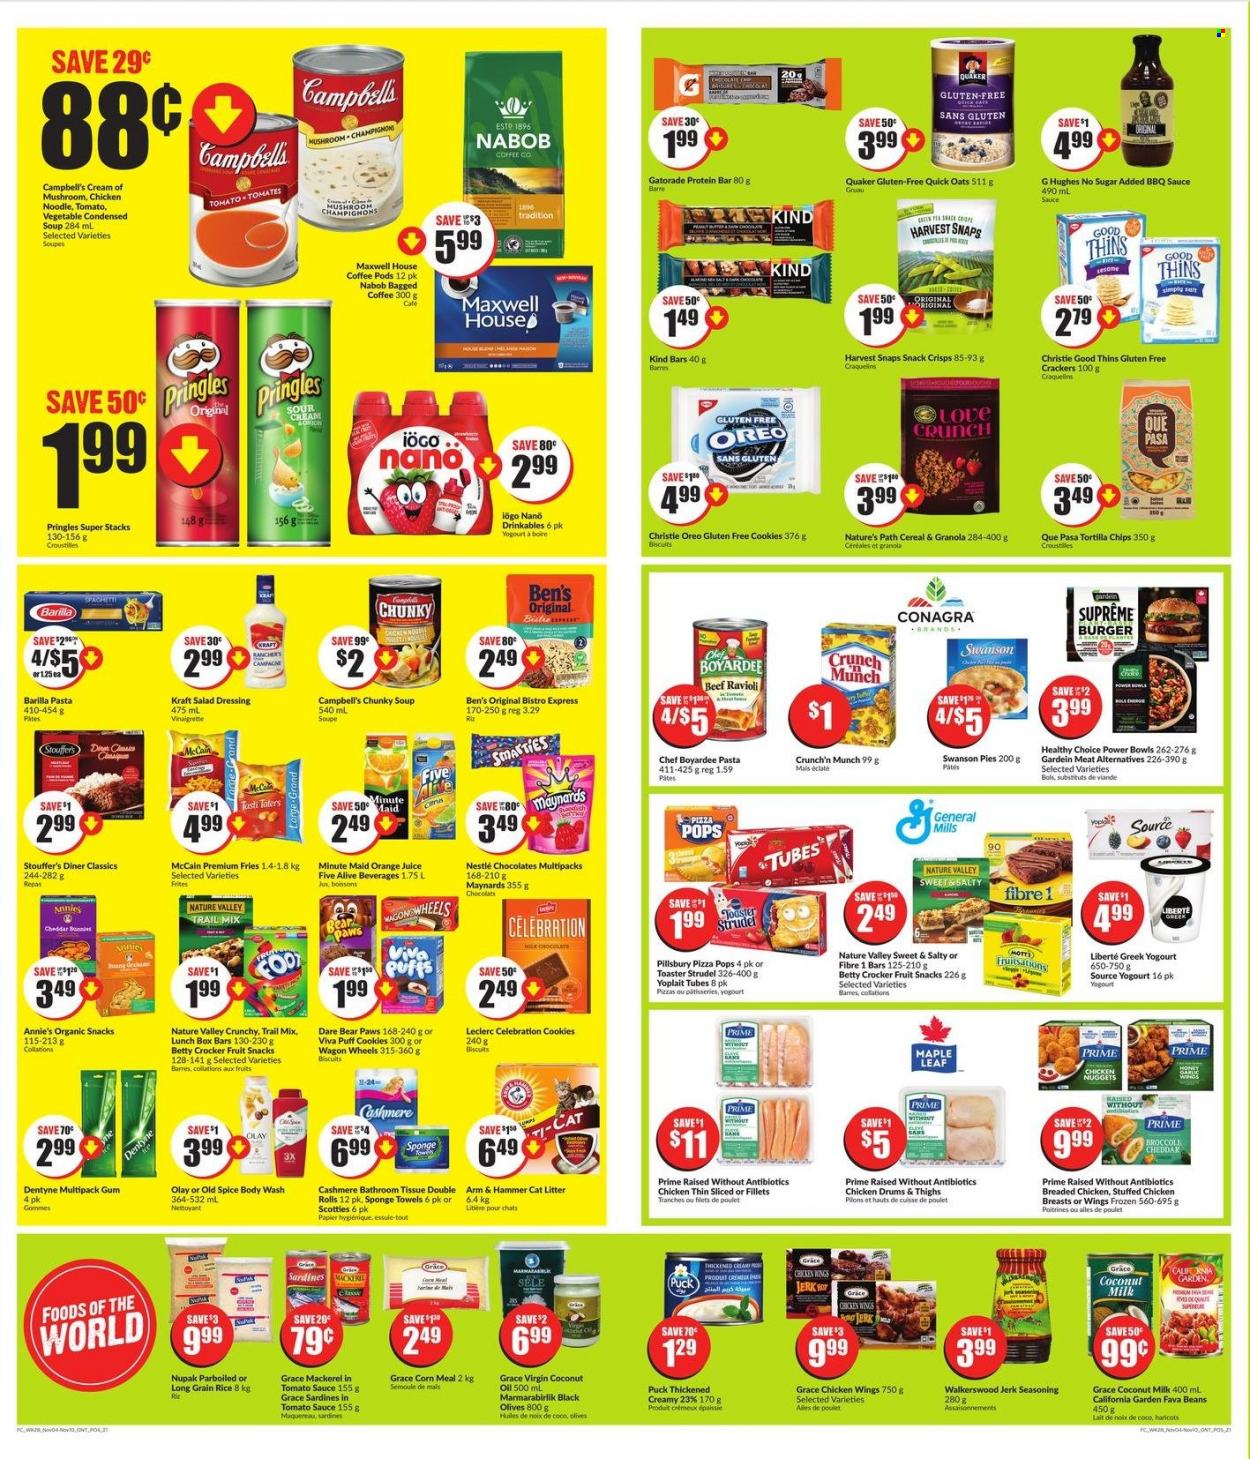 thumbnail - Chalo! FreshCo. Flyer - November 04, 2021 - November 10, 2021 - Sales products - strudel, broccoli, corn, fava beans, Mott's, mackerel, sardines, Campbell's, ravioli, pizza, condensed soup, soup, nuggets, hamburger, pasta, fried chicken, Pillsbury, chicken nuggets, Barilla, Quaker, noodles, instant soup, Healthy Choice, Annie's, Kraft®, stuffed chicken, Puck, Yoplait, sour cream, chicken wings, Stouffer's, McCain, potato fries, cookies, chocolate, Celebration, crackers, biscuit, fruit snack, tortilla chips, Pringles, Thins, ARM & HAMMER, oats, Harvest Snaps, coconut milk, Chef Boyardee, cereals, protein bar, Quick Oats, Nature Valley, rice, long grain rice, spice, BBQ sauce, salad dressing, vinaigrette dressing, dressing, coconut oil, oil, honey, trail mix, orange juice, juice, Gatorade, fruit punch, Maxwell House, coffee pods, bagged coffee, Oreo, Nestlé, granola, Old Spice, olives. Page 4.